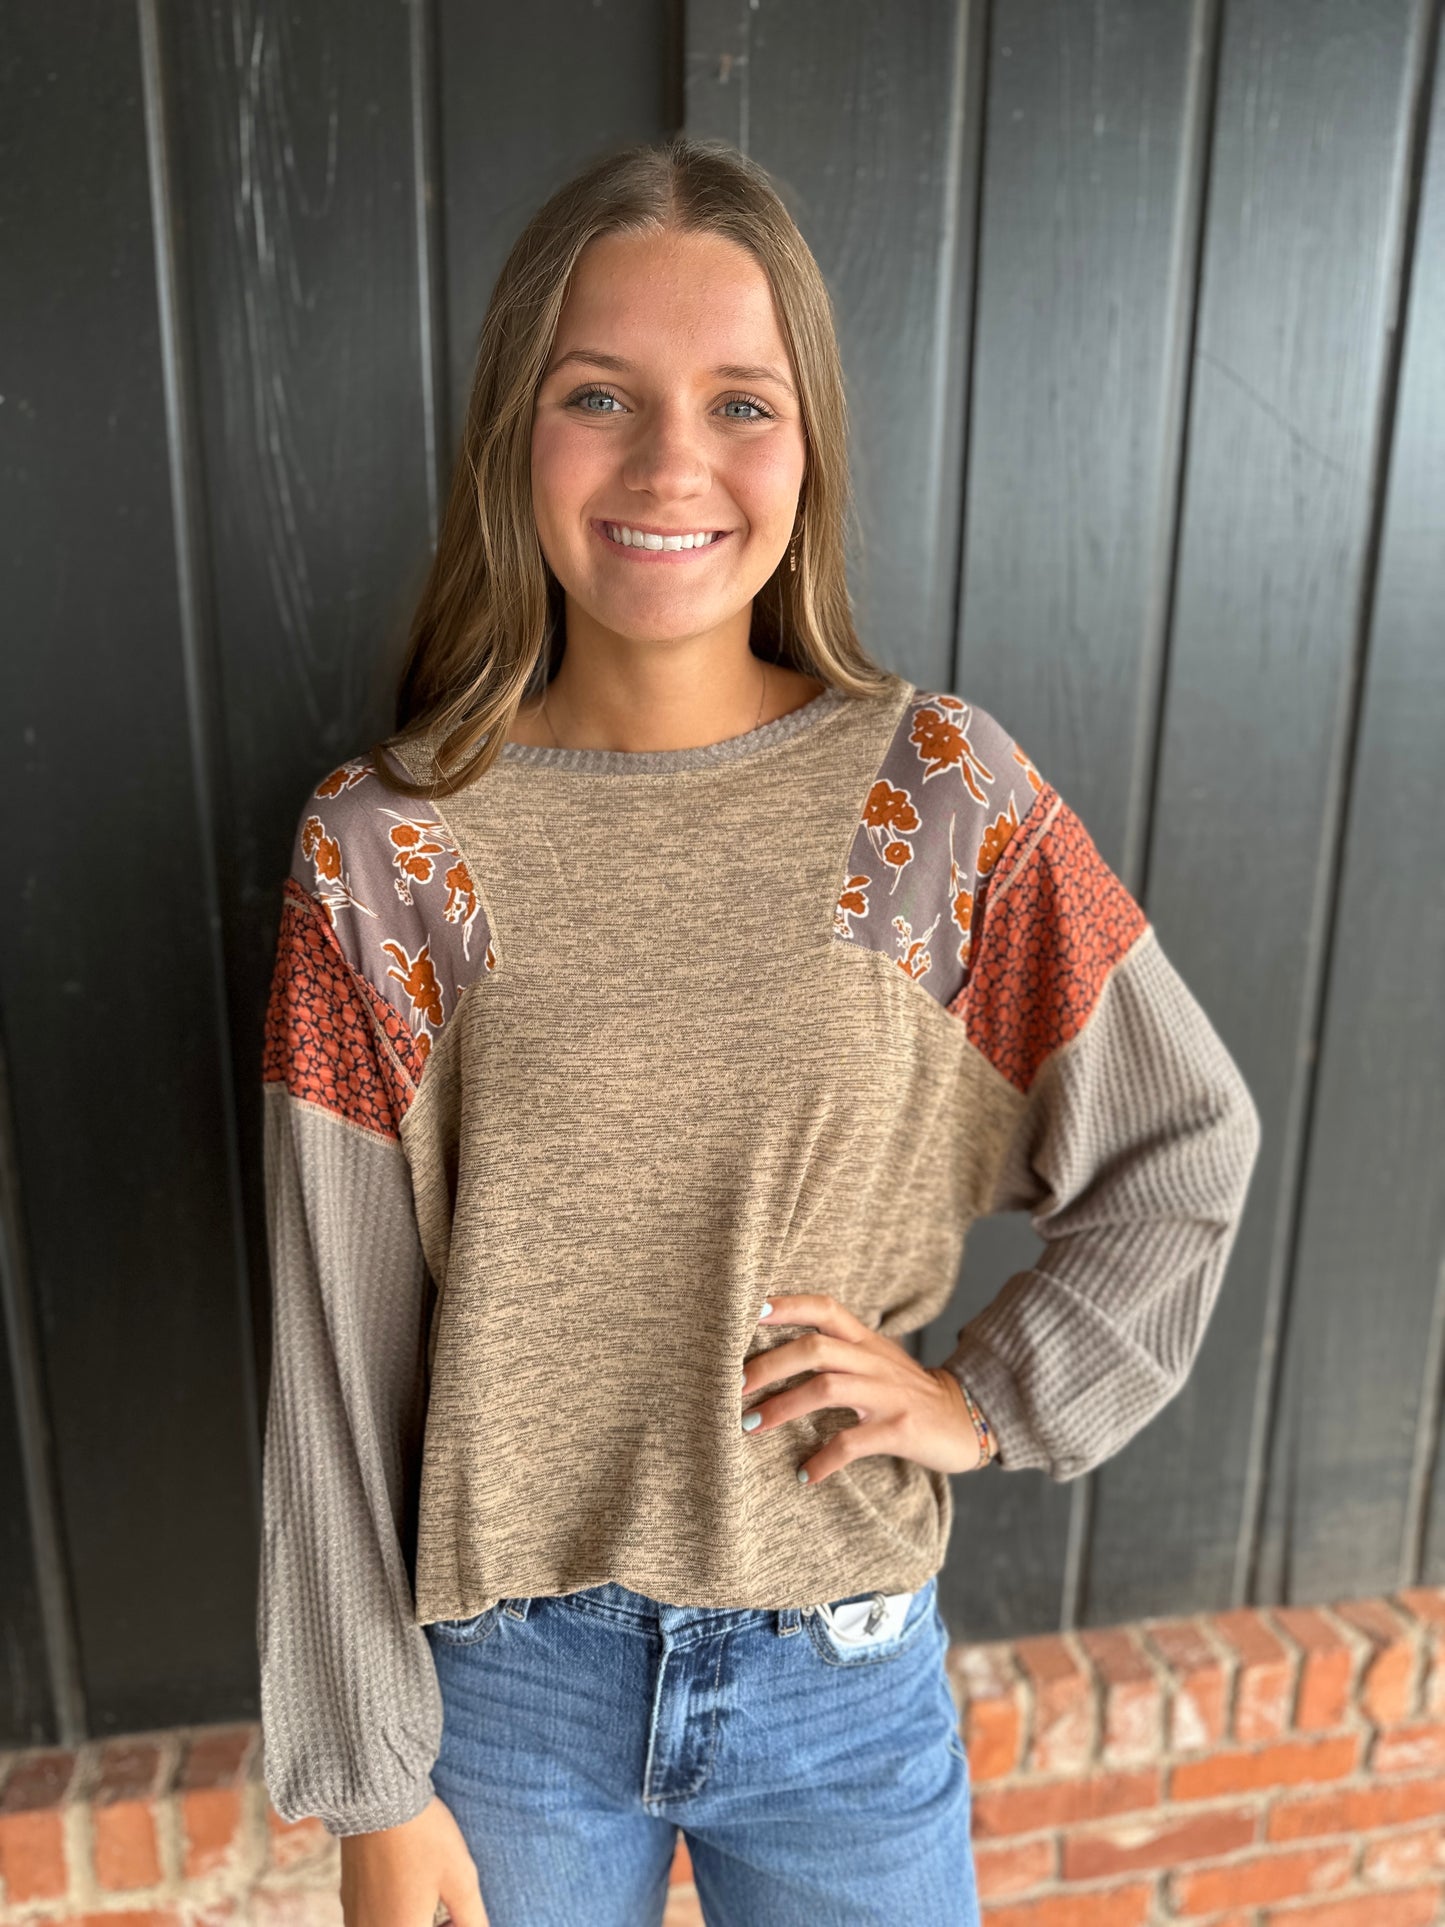 The Frankie Fabric Mixed Knit Top